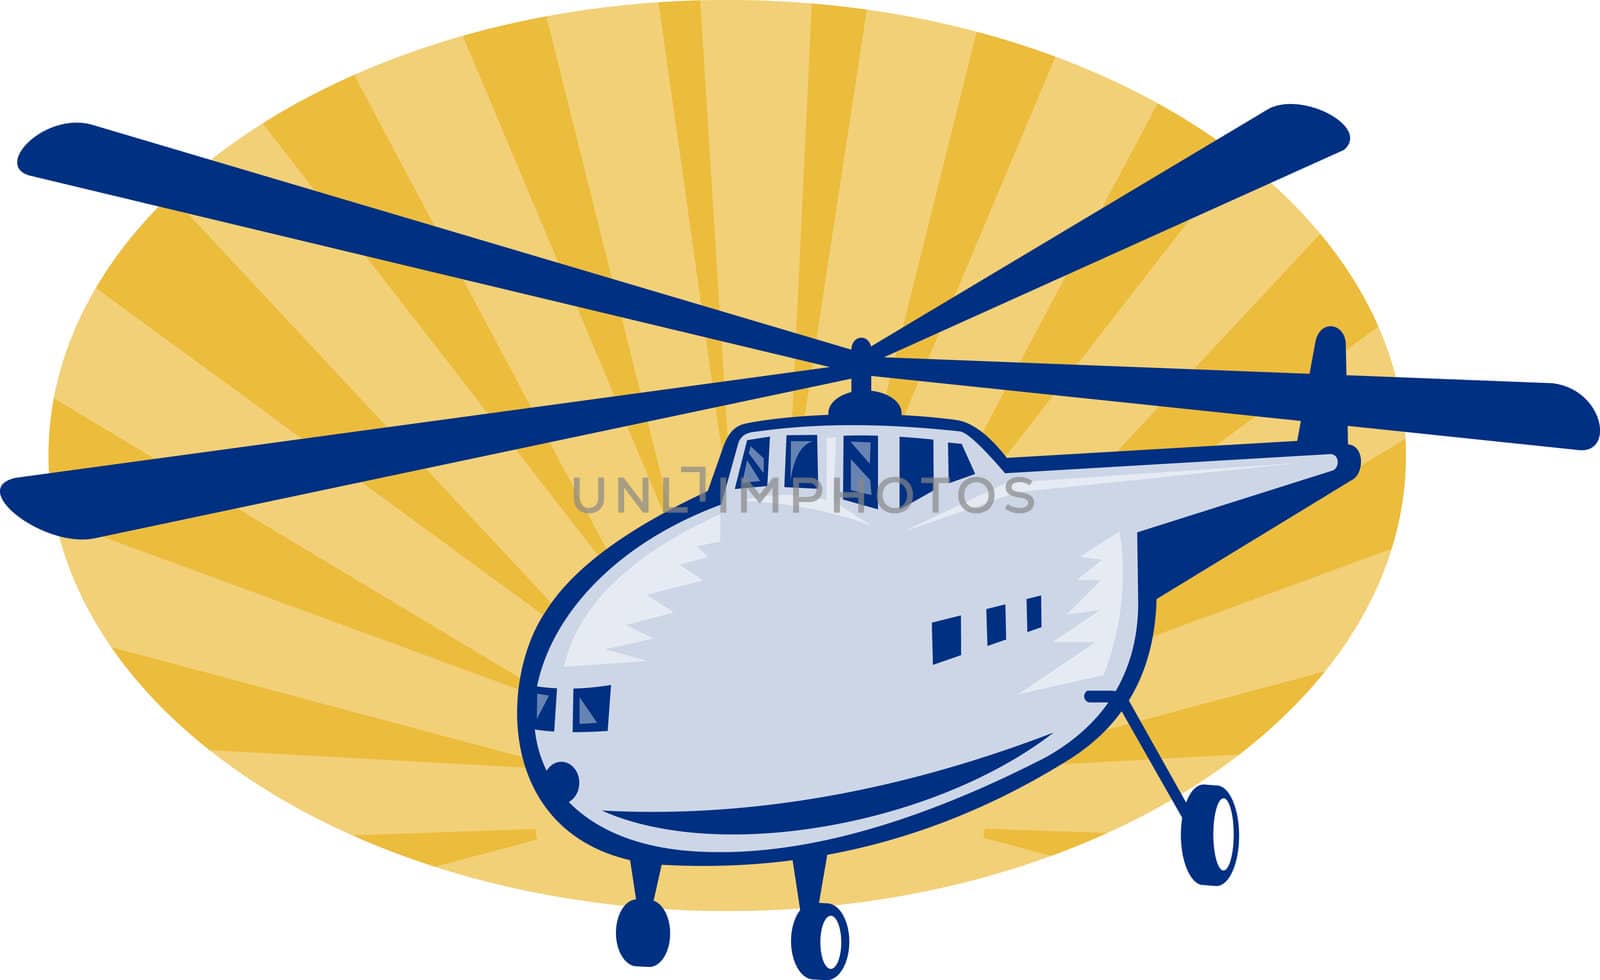 Retro style helicopter or chopper by patrimonio